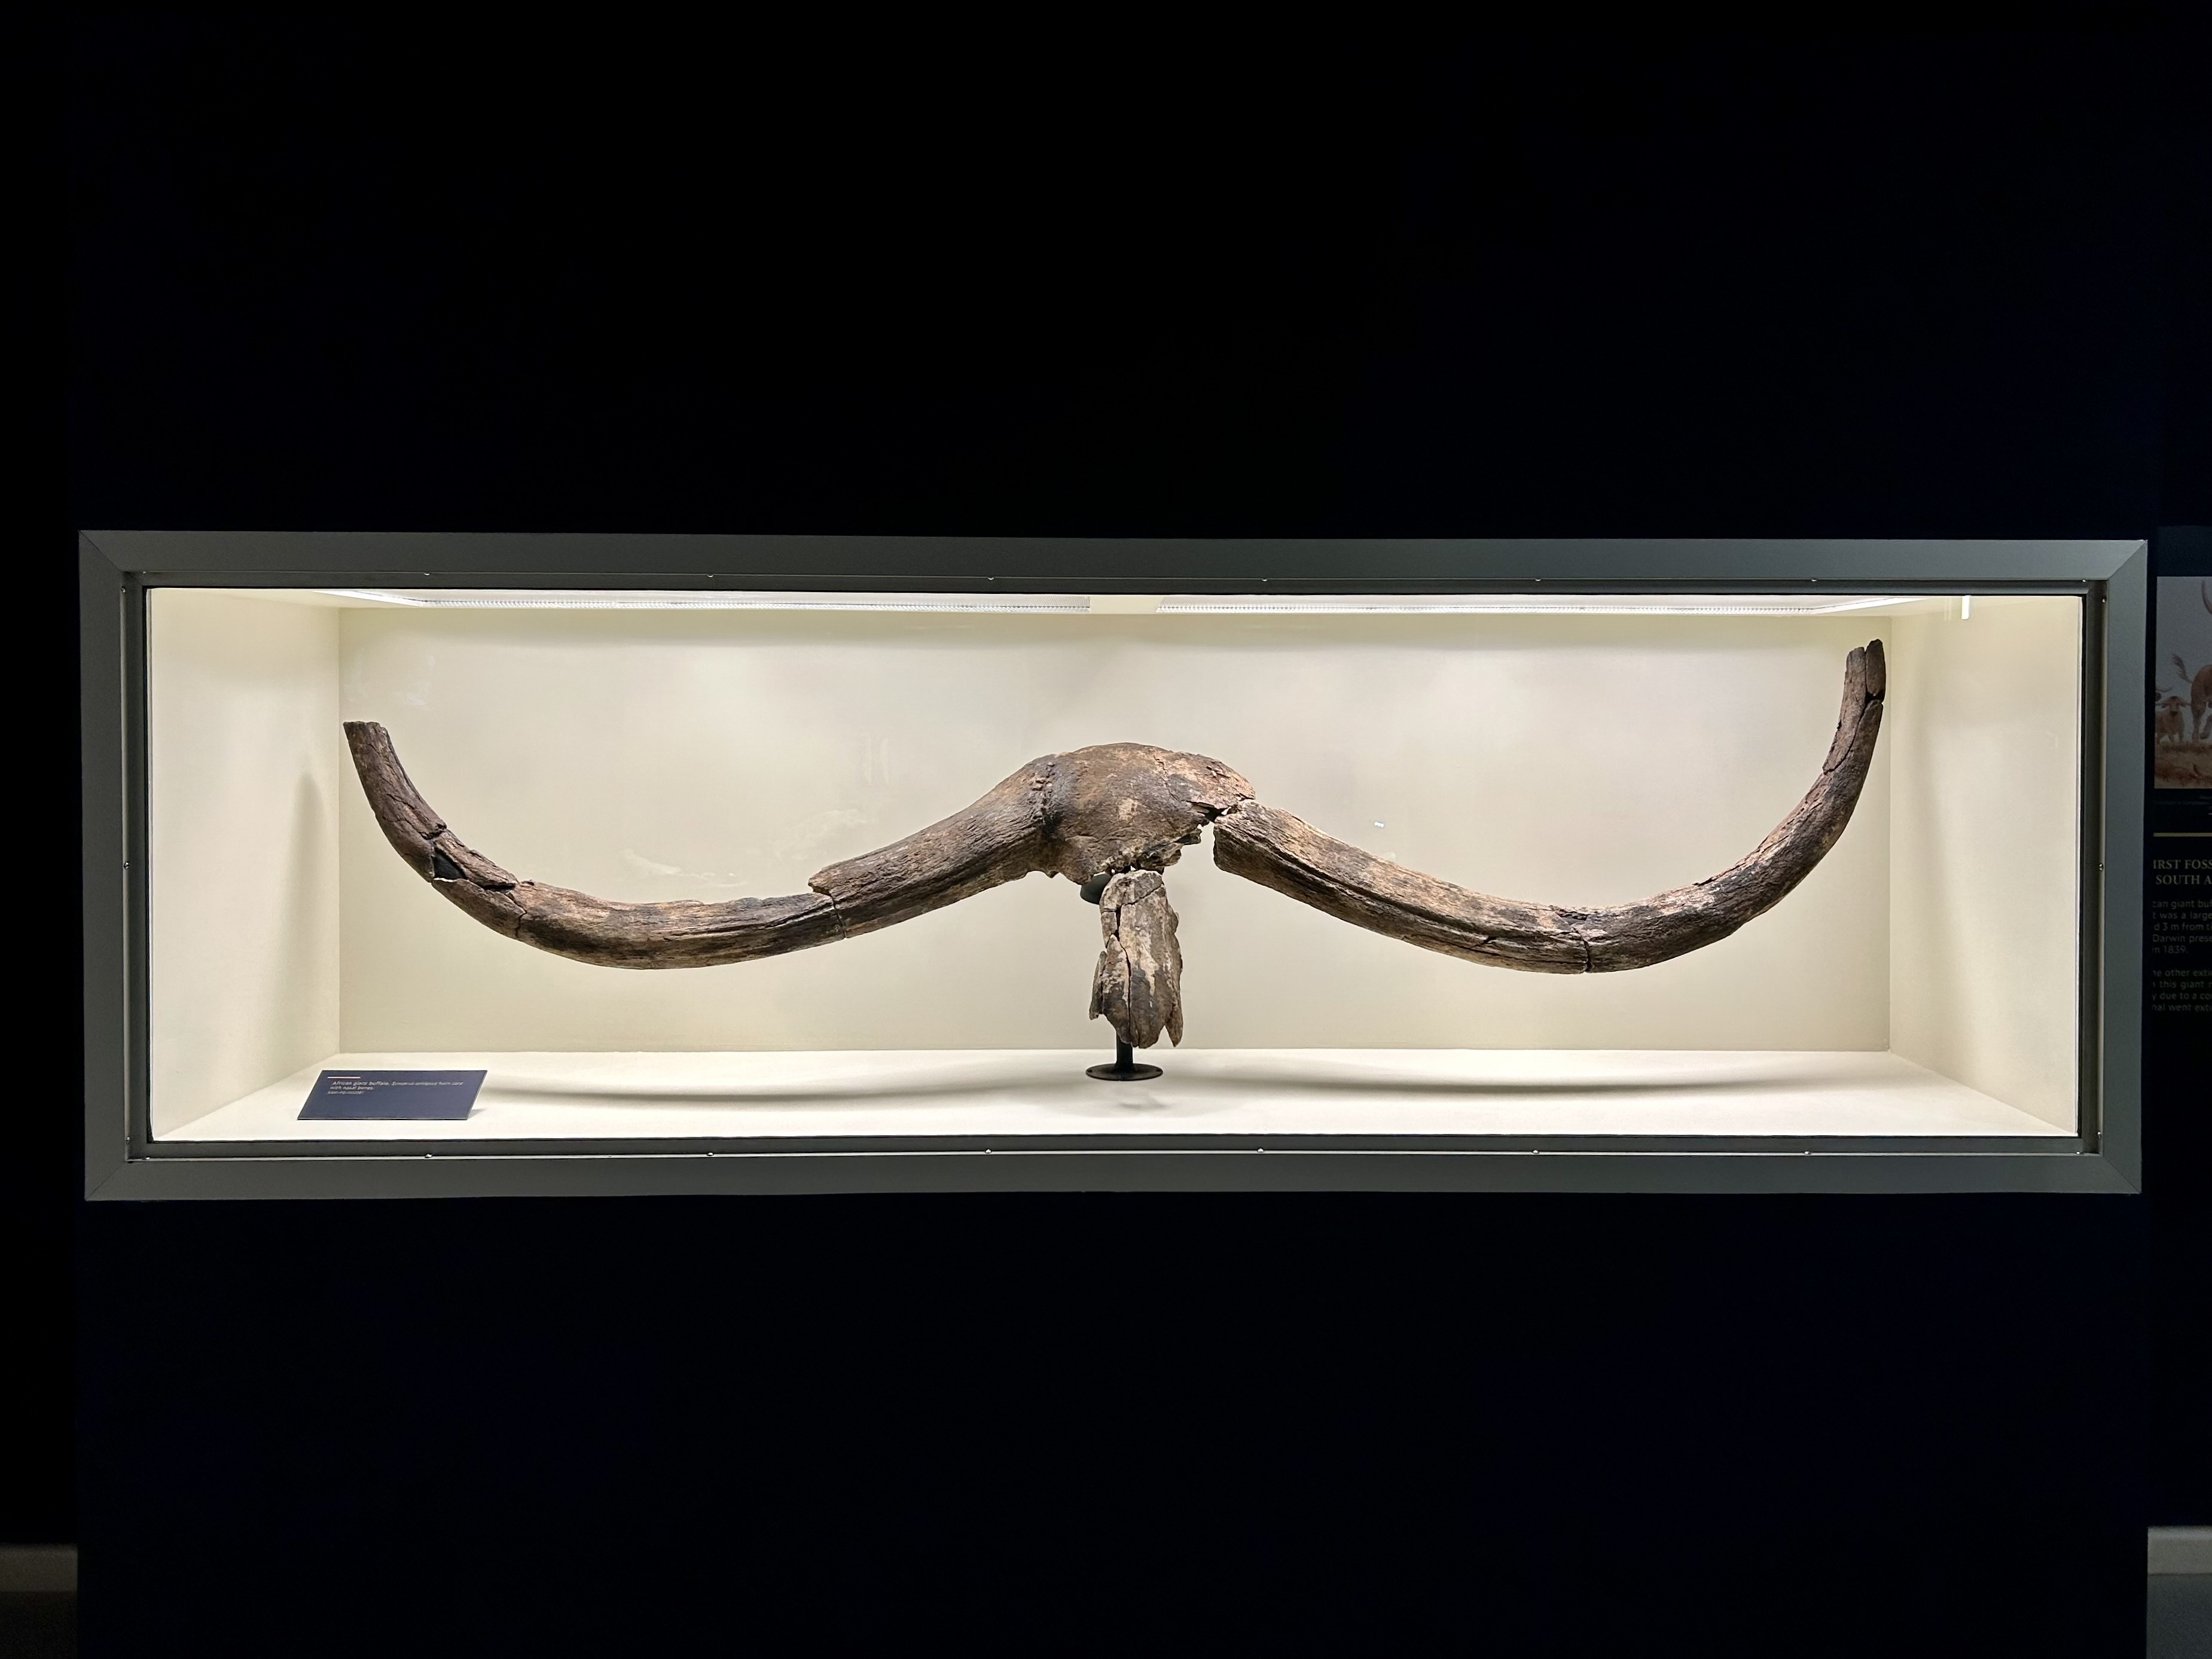 The African giant buffalo is the largest bovid ever described from Africa with horns measuring 3 metres from one tip to the other. The exact horns exhibited at the “The Hidden Wonders of the Iziko South African Museum” exhibition were presented to the Geological Society of London in 1839 by Charles Darwin. Image: Jean-Marie Uys